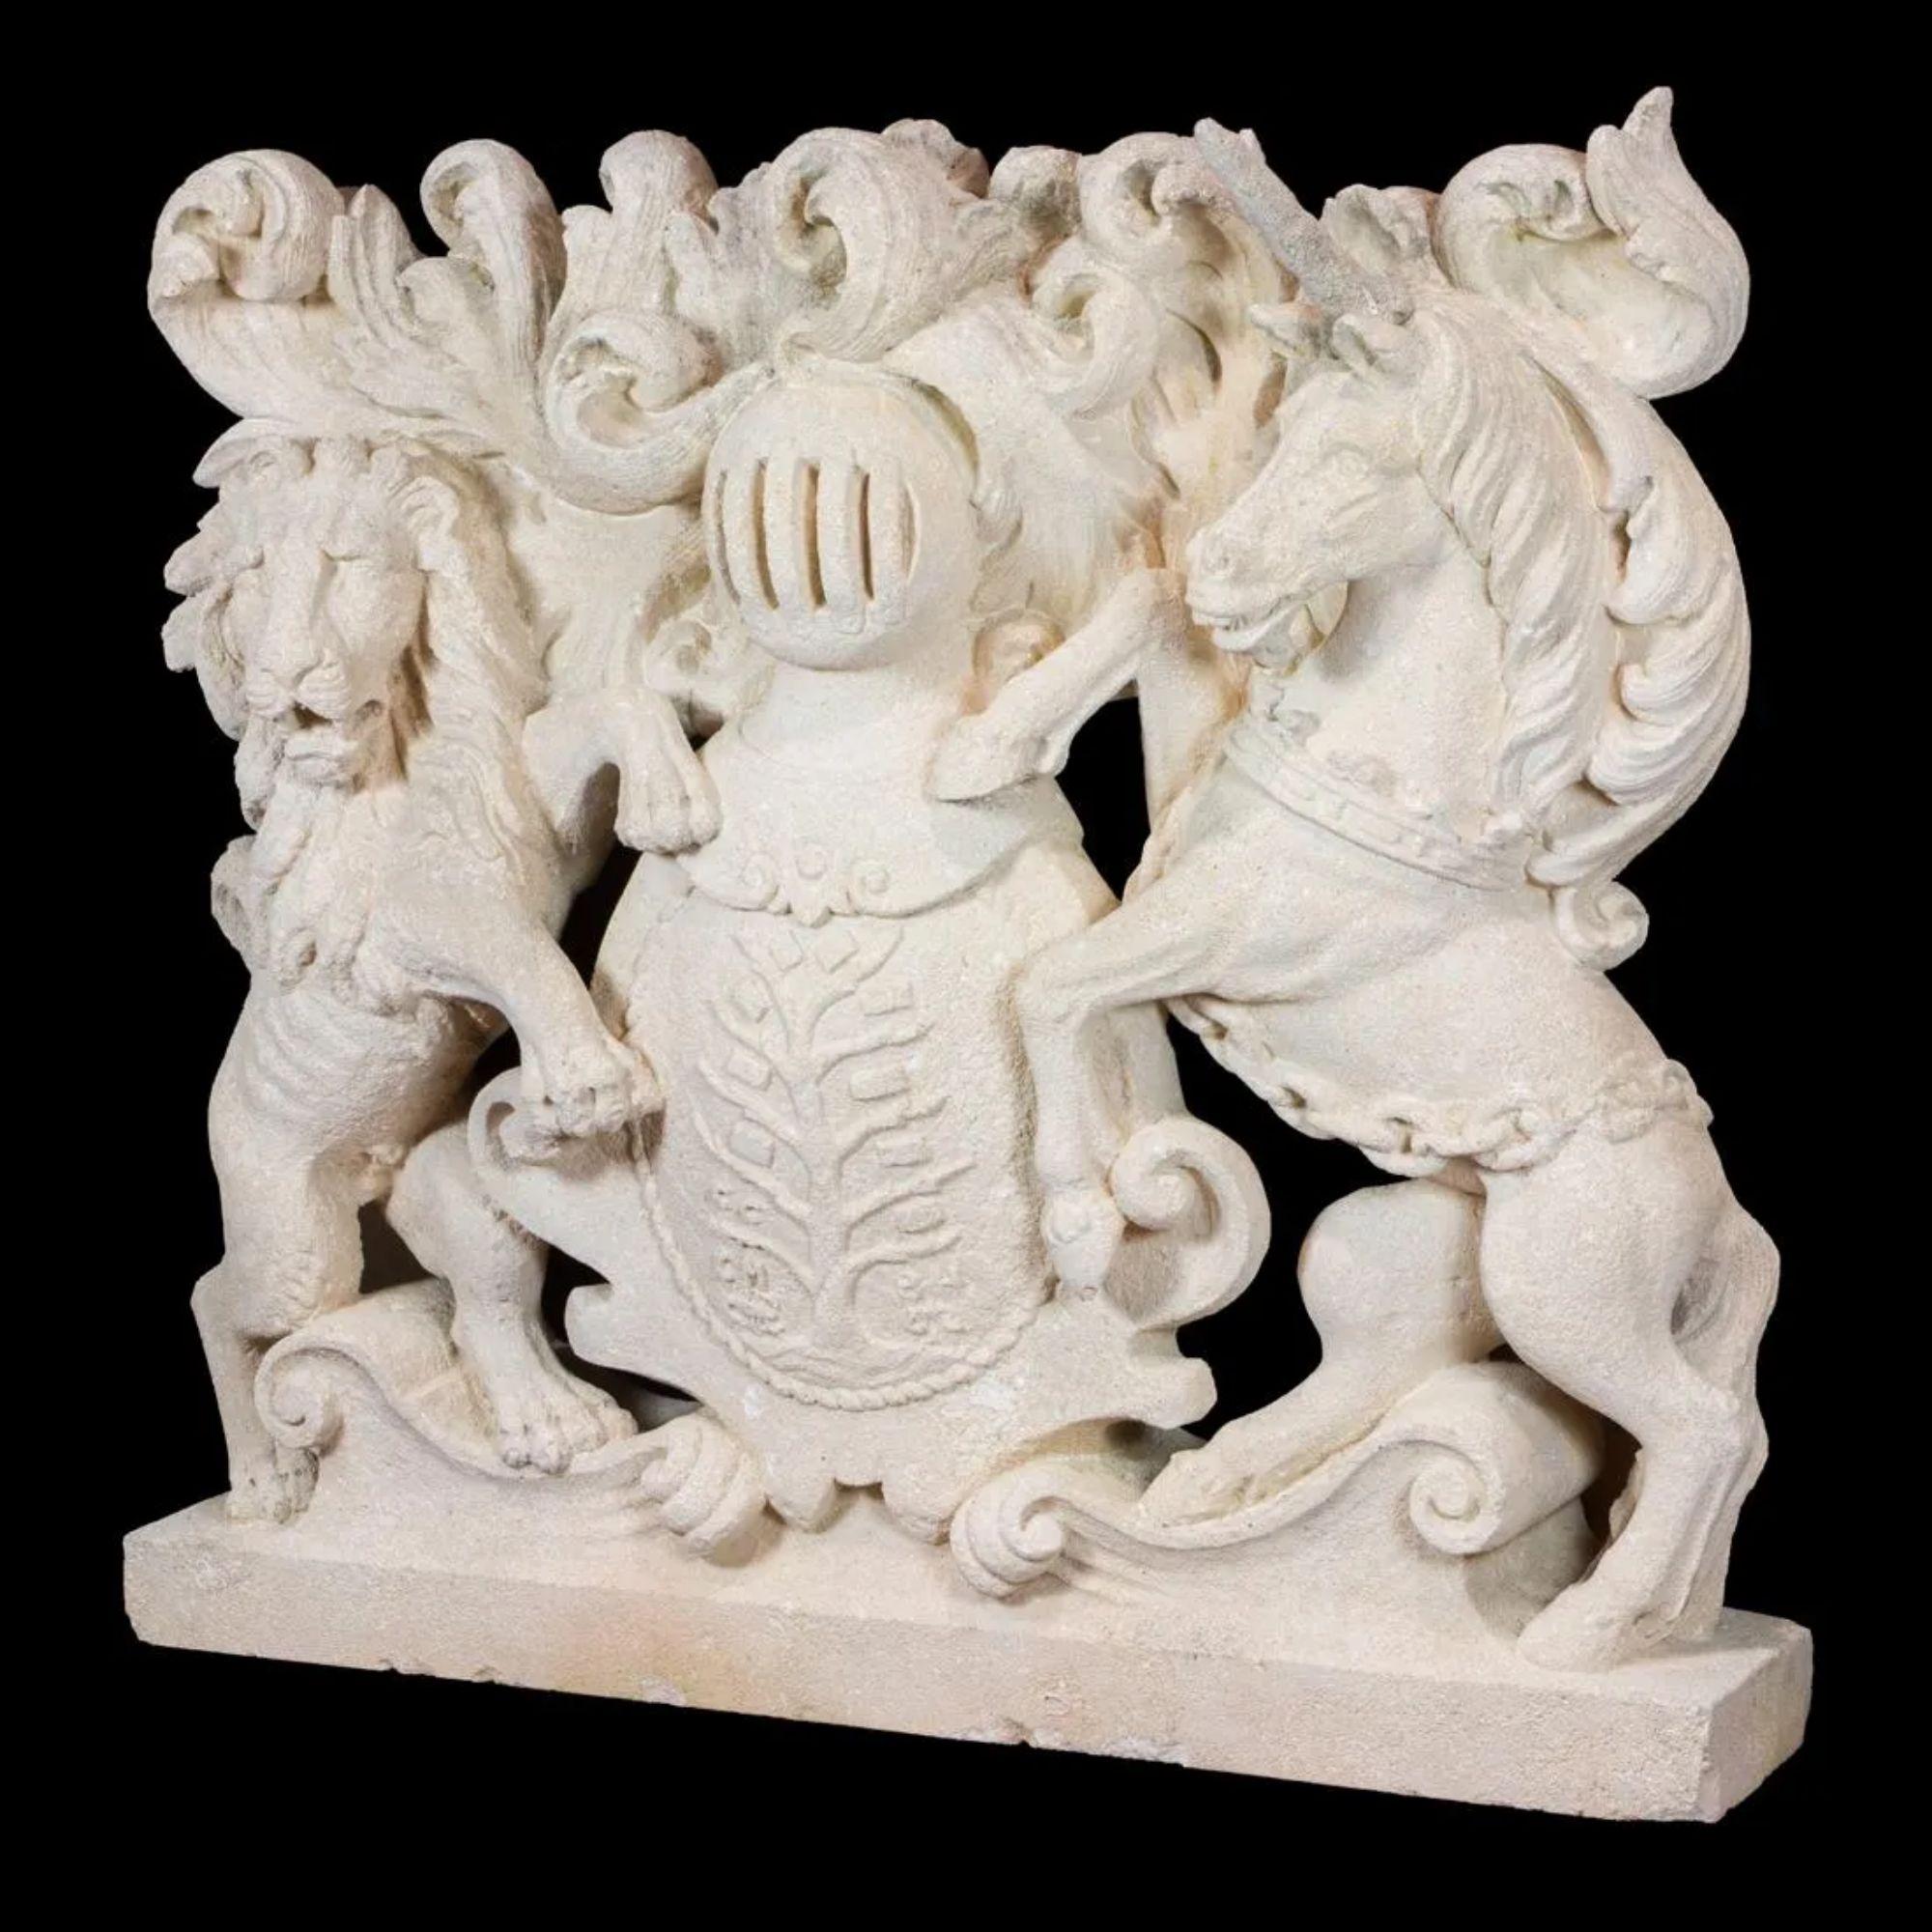 18th C style stone armorial Heraldic crest sculpture - royal coat of arms. Featuring a lion & unicorn crest, symbols of the United Kingdom and Scotland.

Additional information:
Materials: stone
Color: antique white
Period: mid-20th